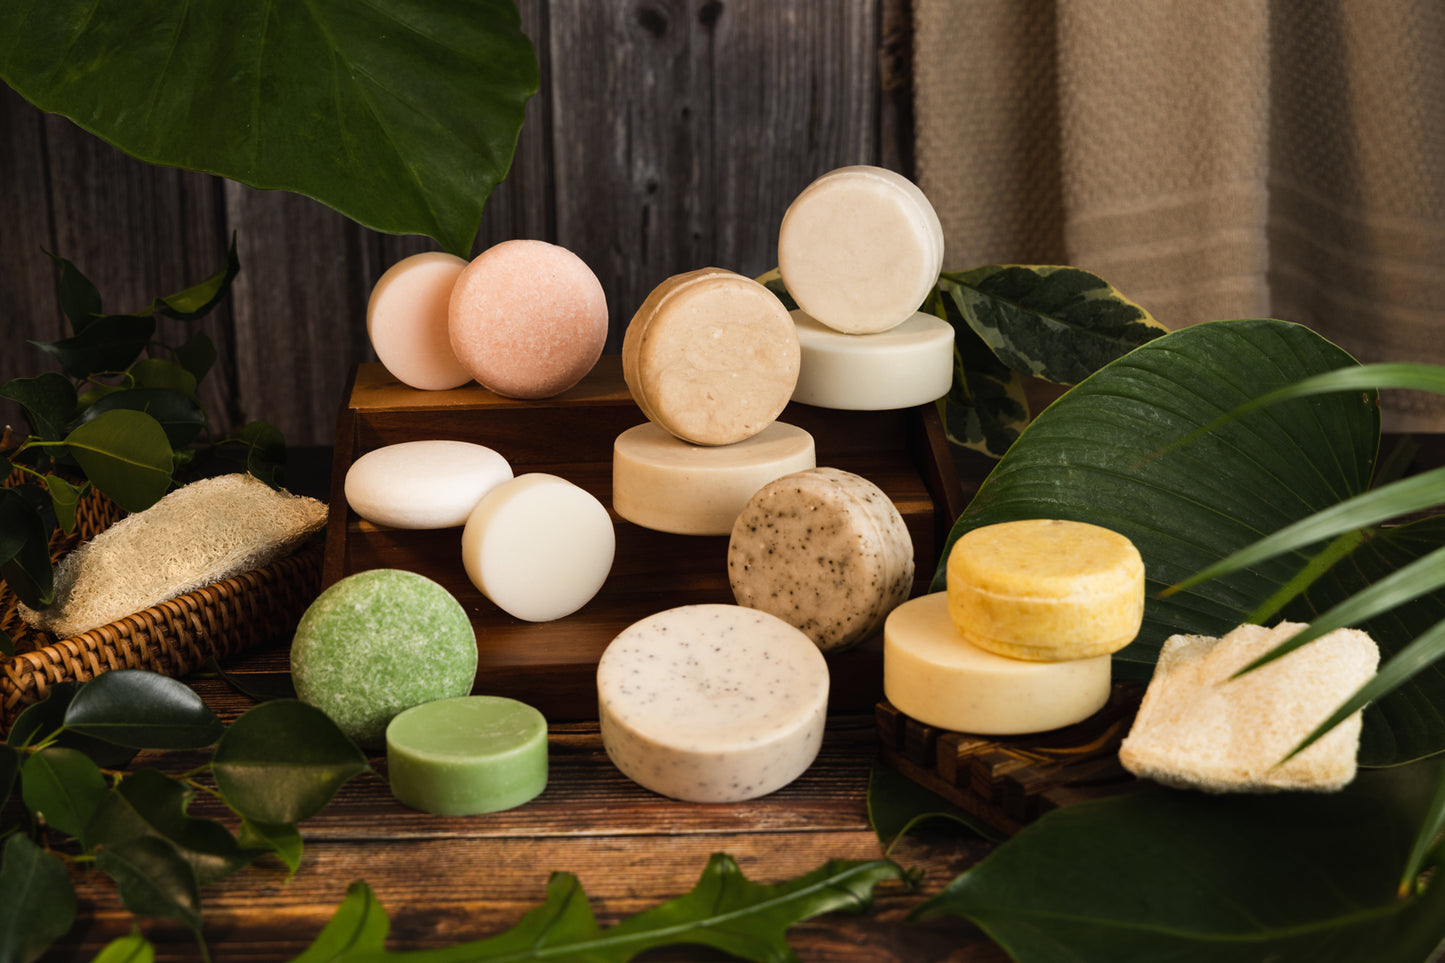 This image shows a natural loofah exfoliating pad which is used to scrub skin to exfoliate. It is a plastic free product designed for a more eco friendly zero waste sustainable routine. In this image the loofah exfoliating pad is shown next to the full range of solid shampoo and conditioner bars